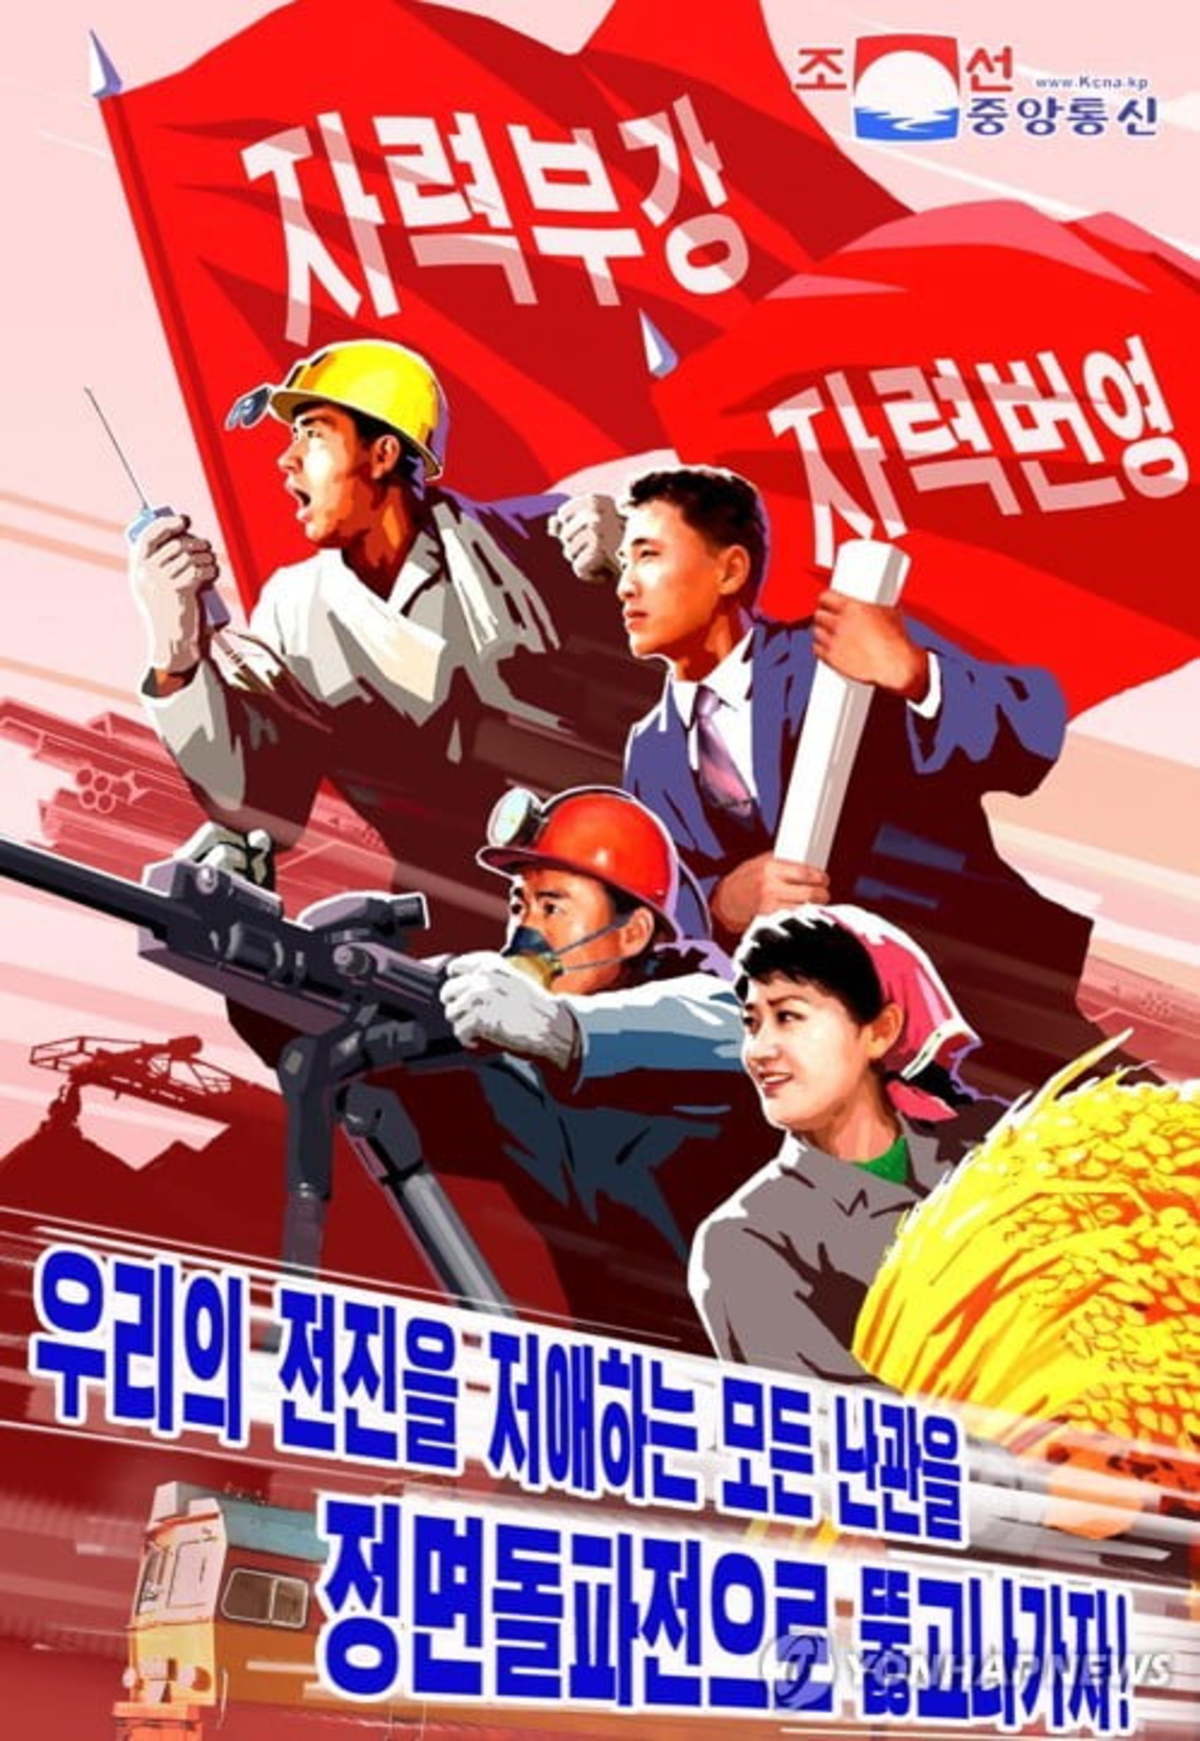 This photo, released by the North's Korean Central News Agency on Jan. 22, 2020, shows one of the new propaganda posters highlighting the important tasks set forth at the fifth plenary meeting of the 7th Central Committee of North Korea's ruling Workers' Party early that year. This poster reads: 